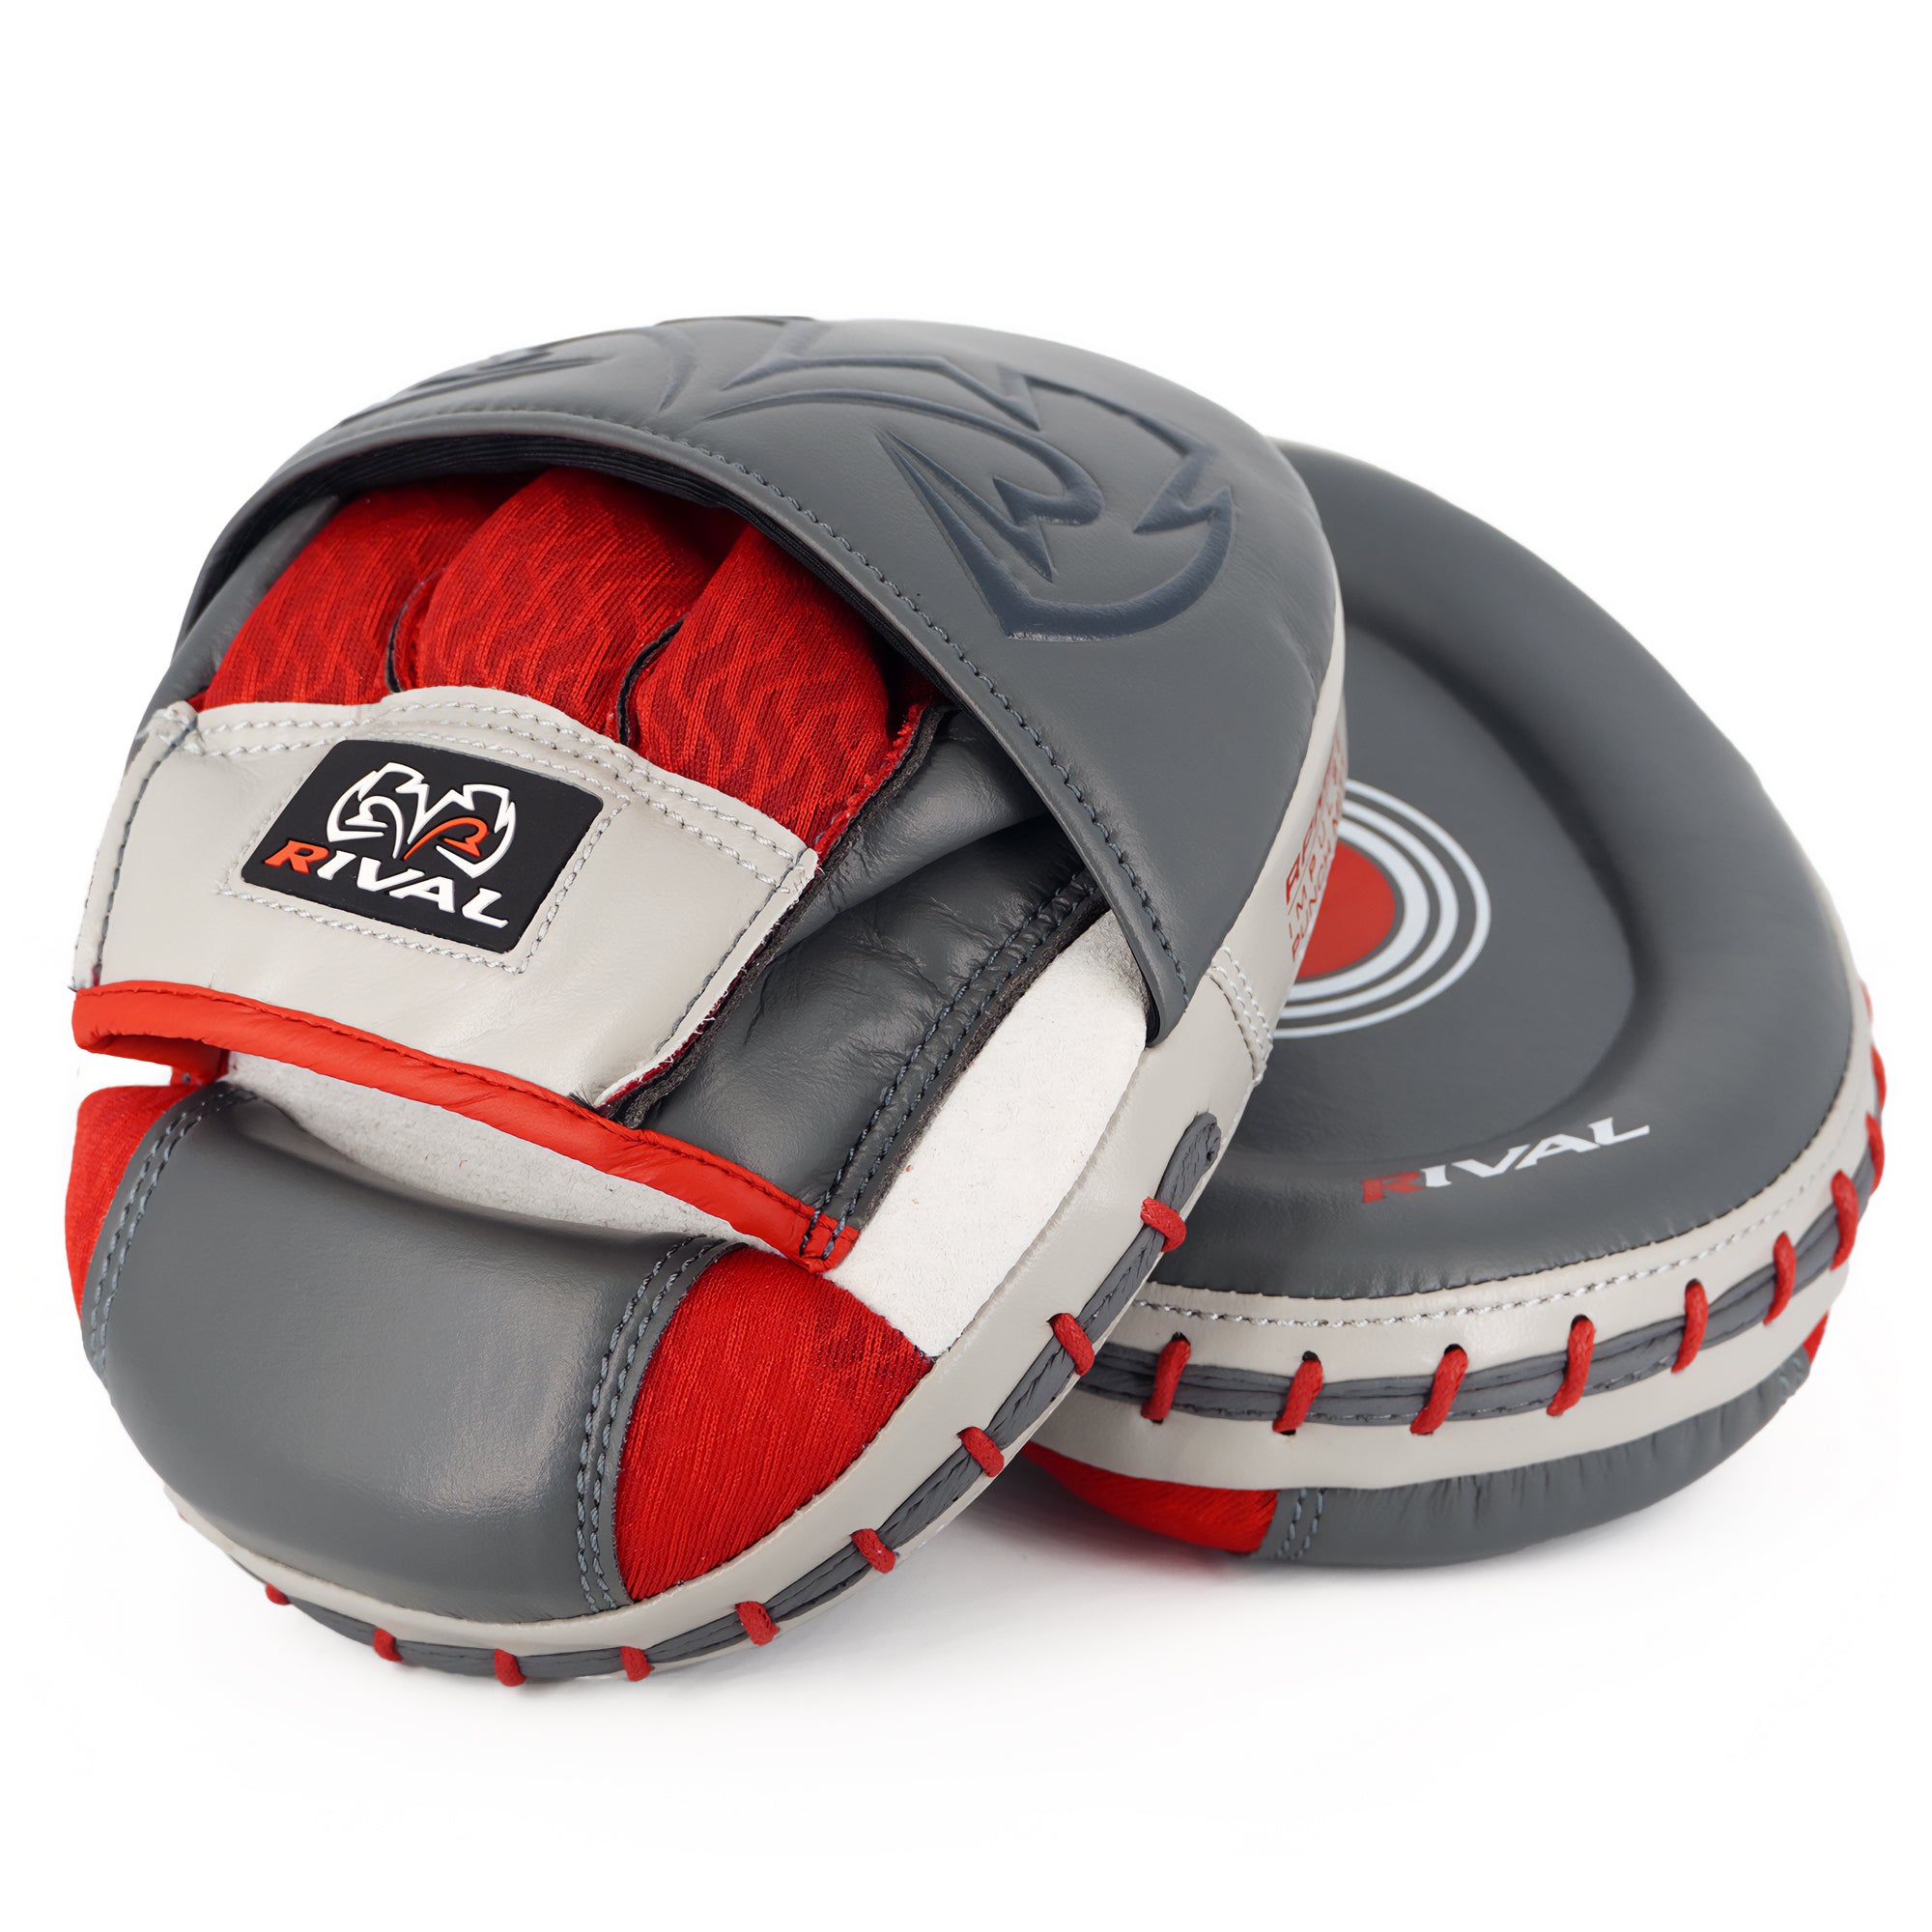 Rival Boxing RPM80 Impulse Punch Mitts RIVAL